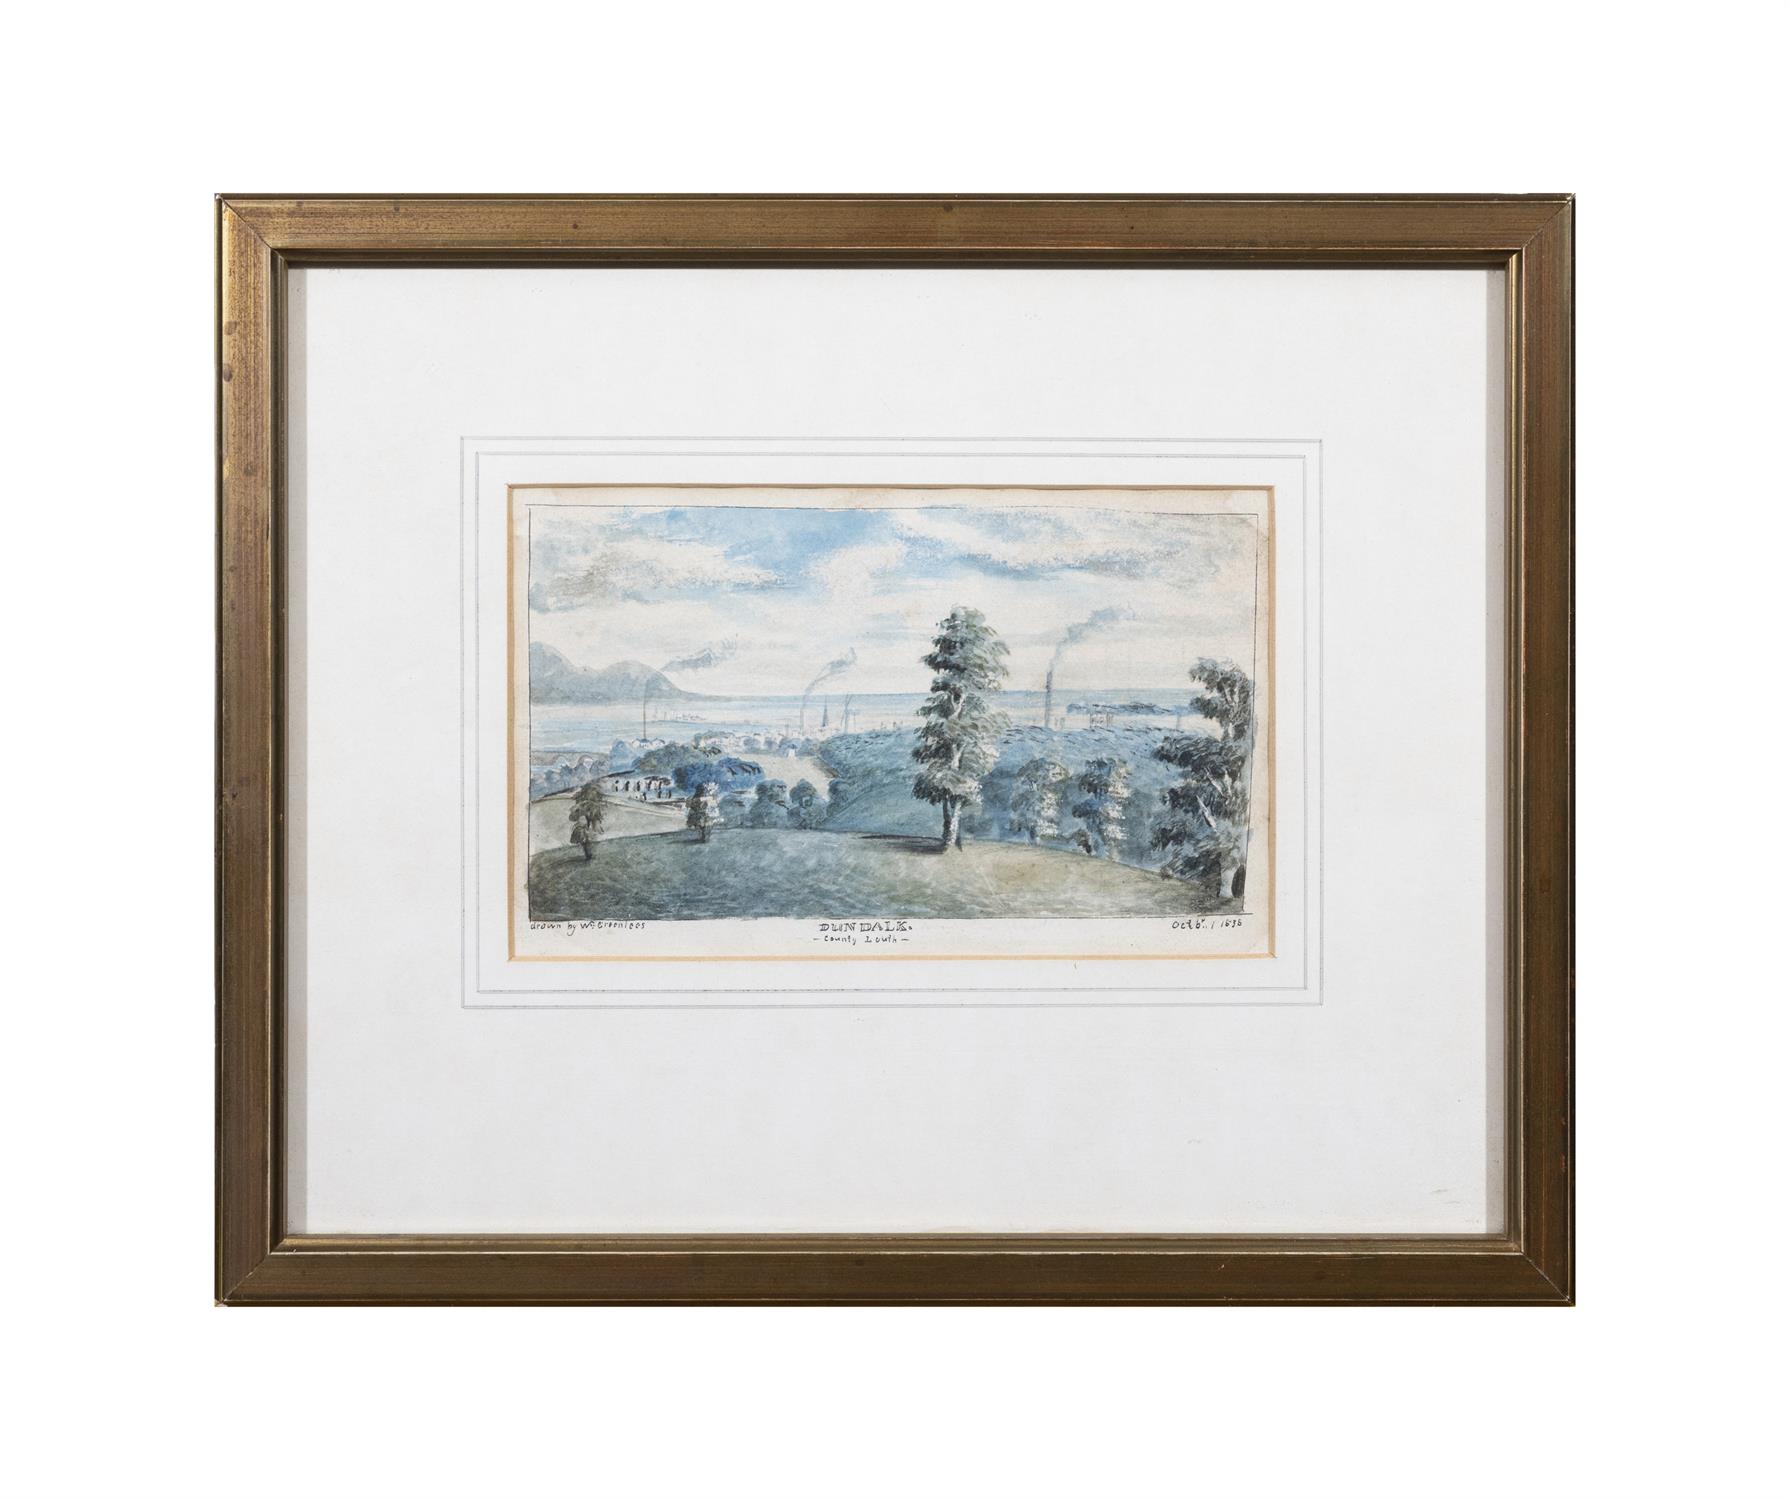 WILLIAM GREENLEES, 19TH CENTURY A View of Dundalk, Co. Louth Watercolour, 11 x 18 Signed,